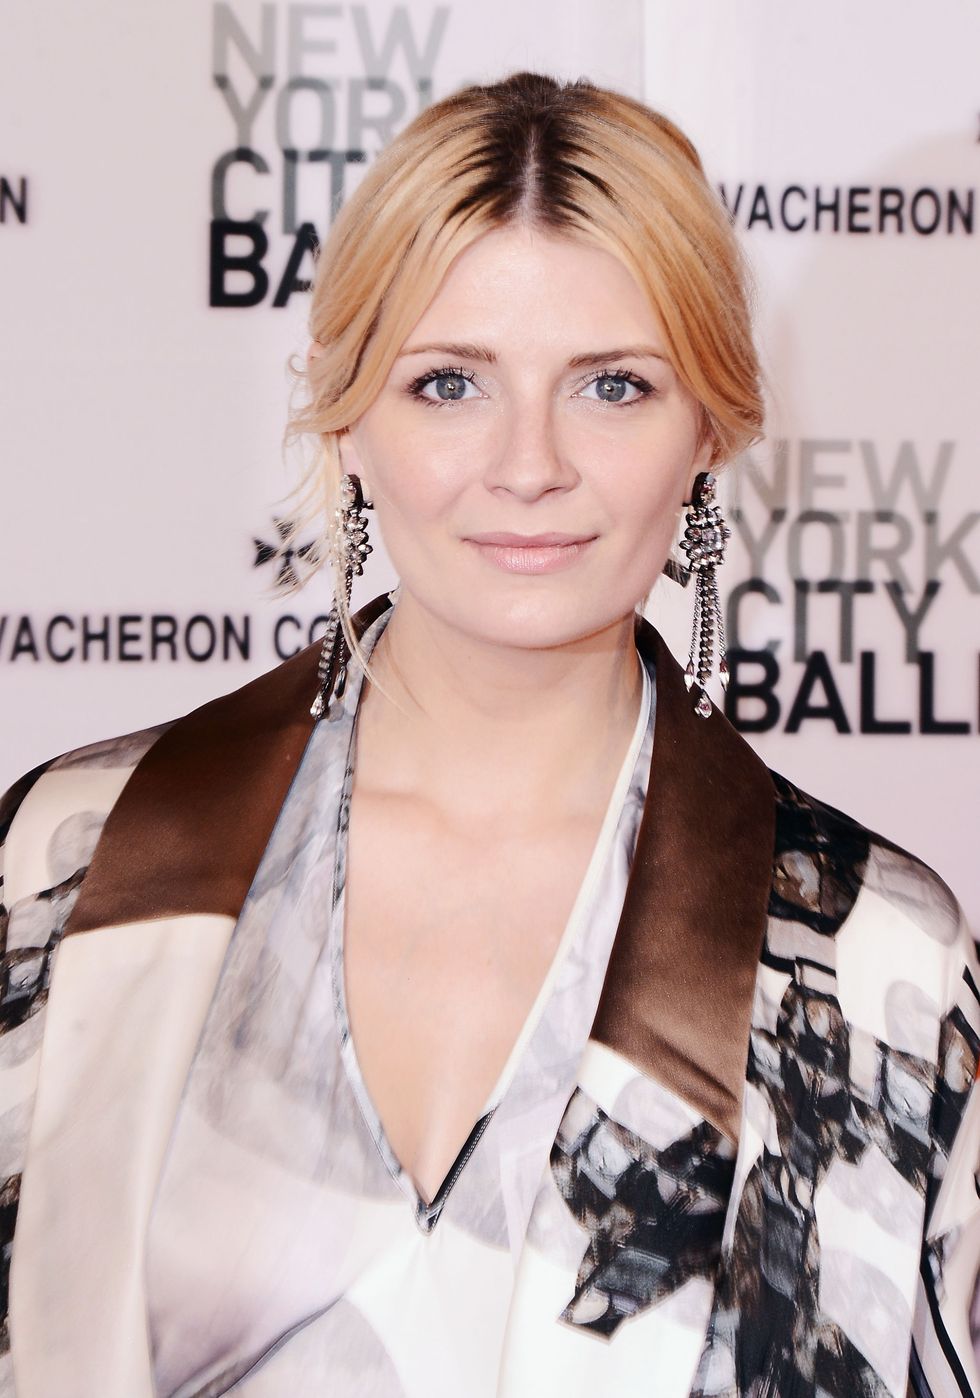 NEW YORK, NY - MAY 07:  Mischa Barton attends the New York City Ballet 2015 Spring Gala at David H. Koch Theater, Lincoln Center on May 7, 2015 in New York City.  (Photo by Stephen Lovekin/Getty Images)